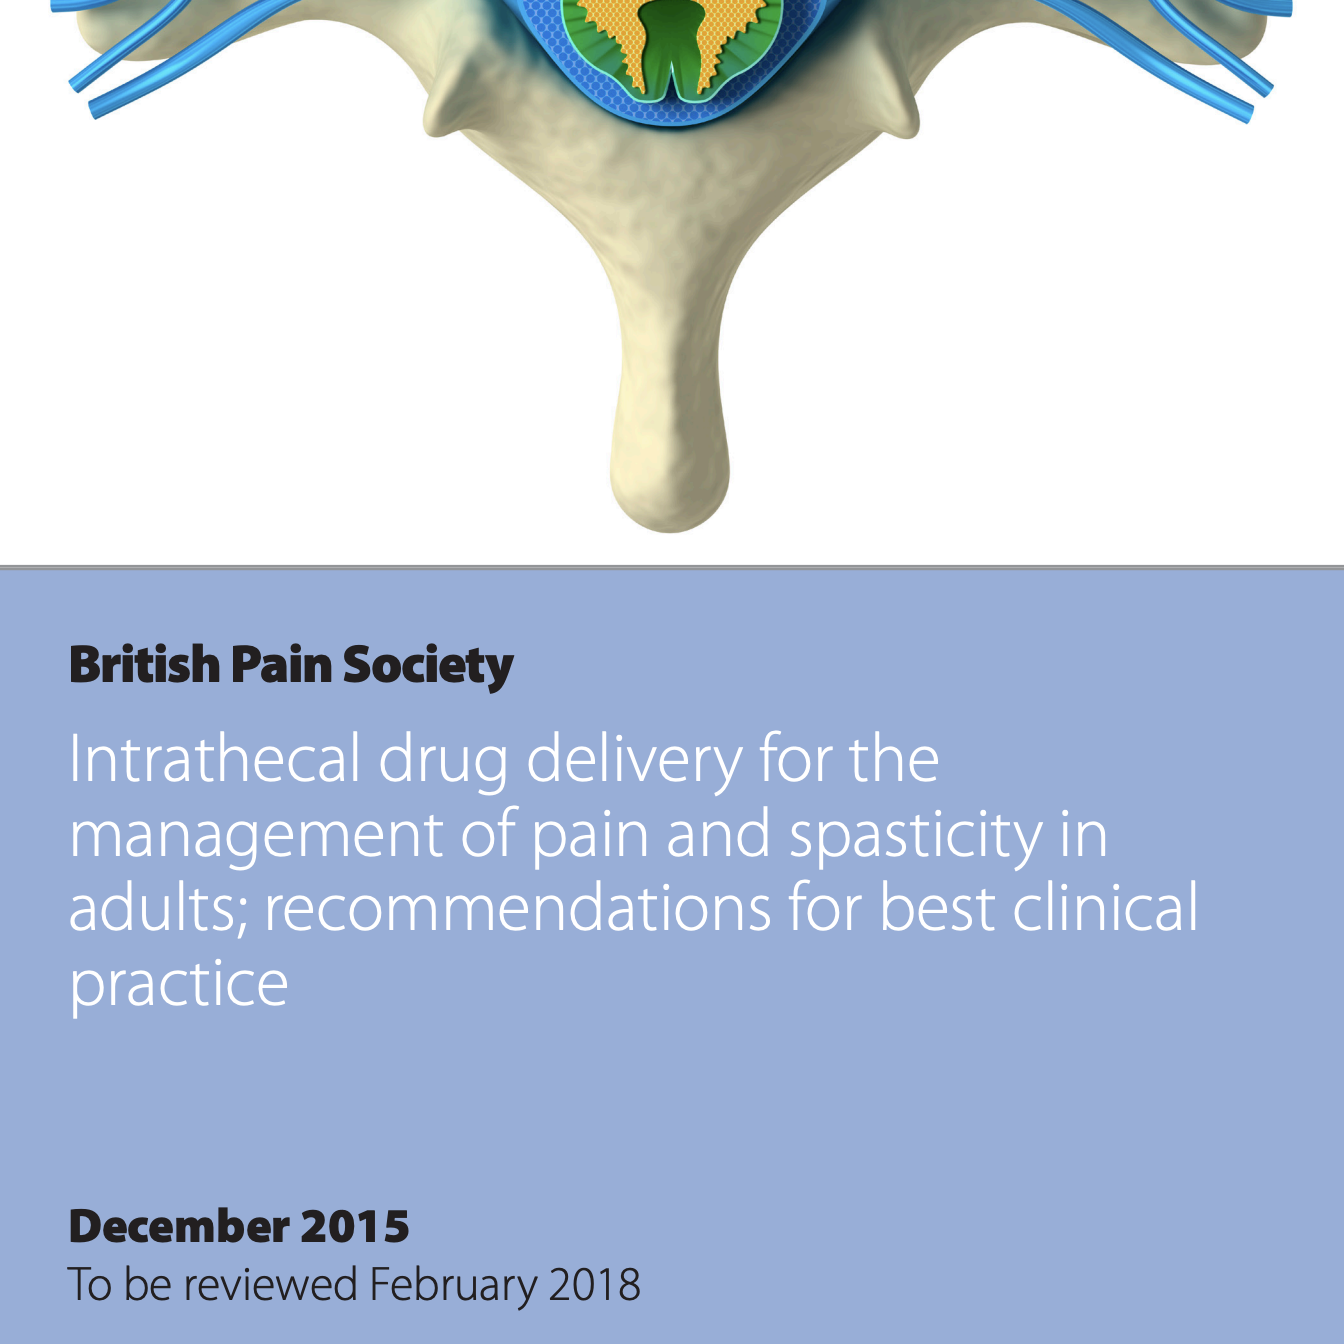 Intrathecal drug delivery for the management of pain and spasticity in adults; recommendations for best clinical practice (2015)